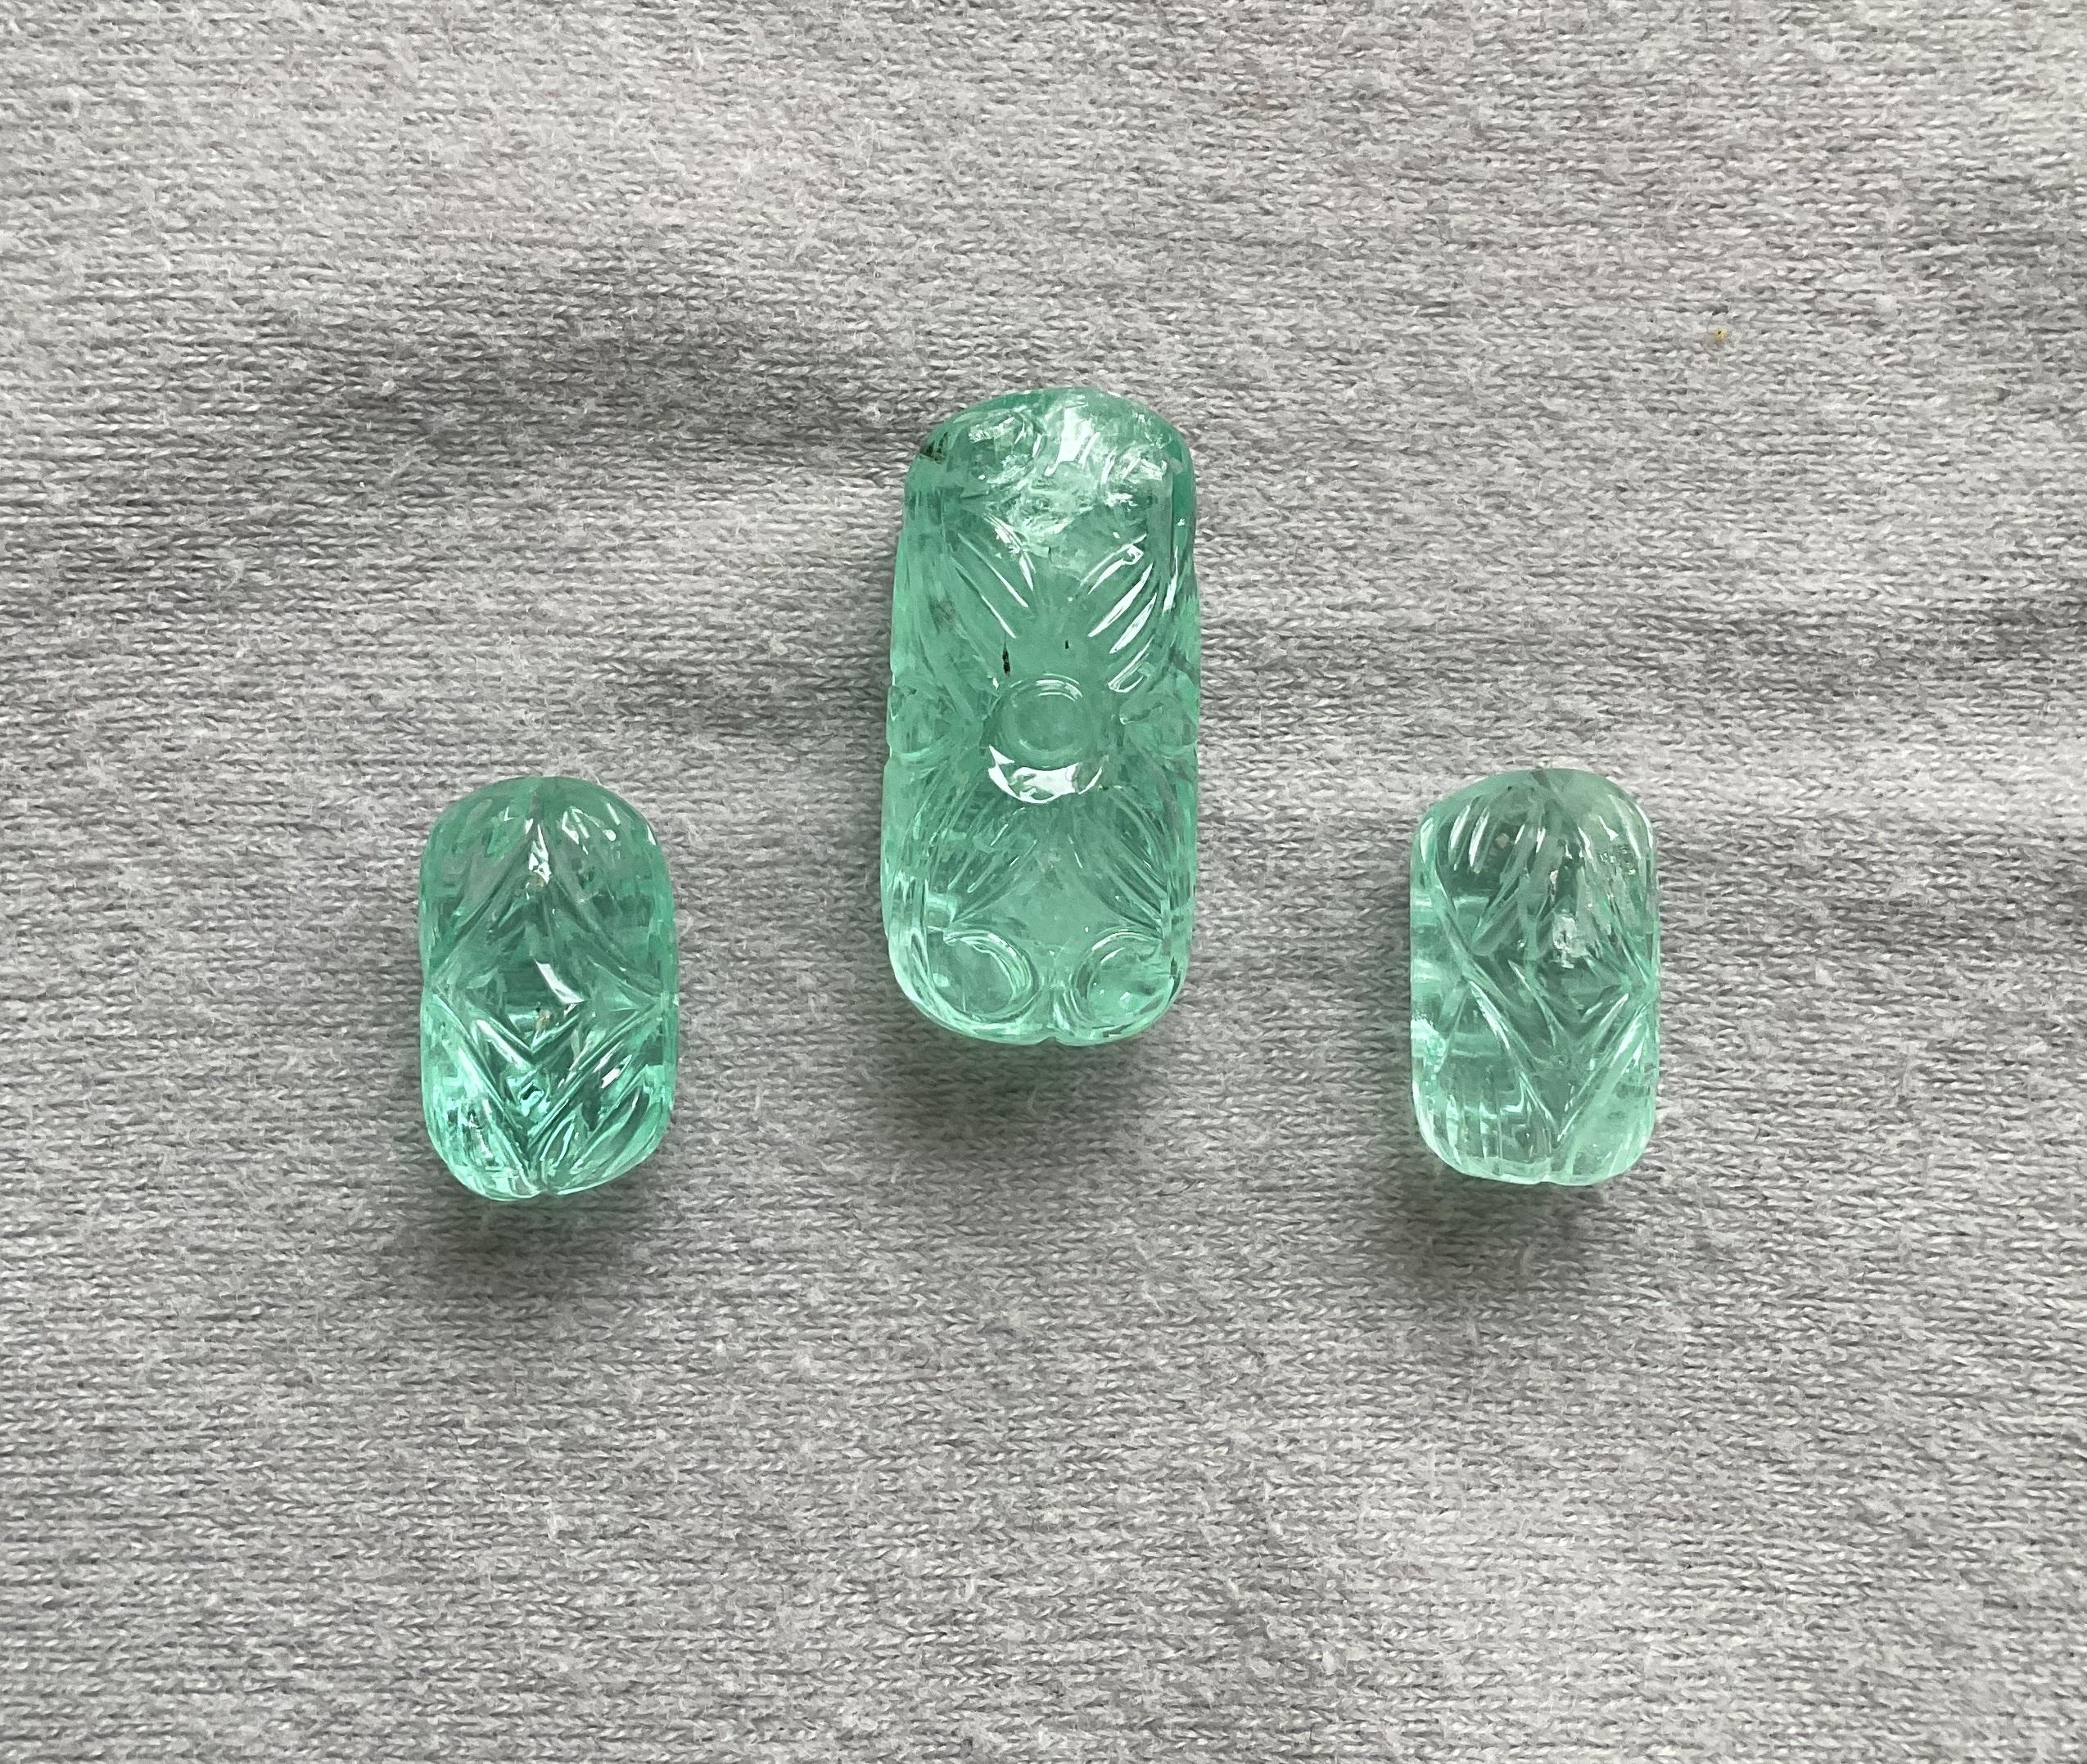 Art Deco 39.93 Carats Russian Emerald Carved 3 Pieces Layout For Jewelry Natural Gemstone For Sale